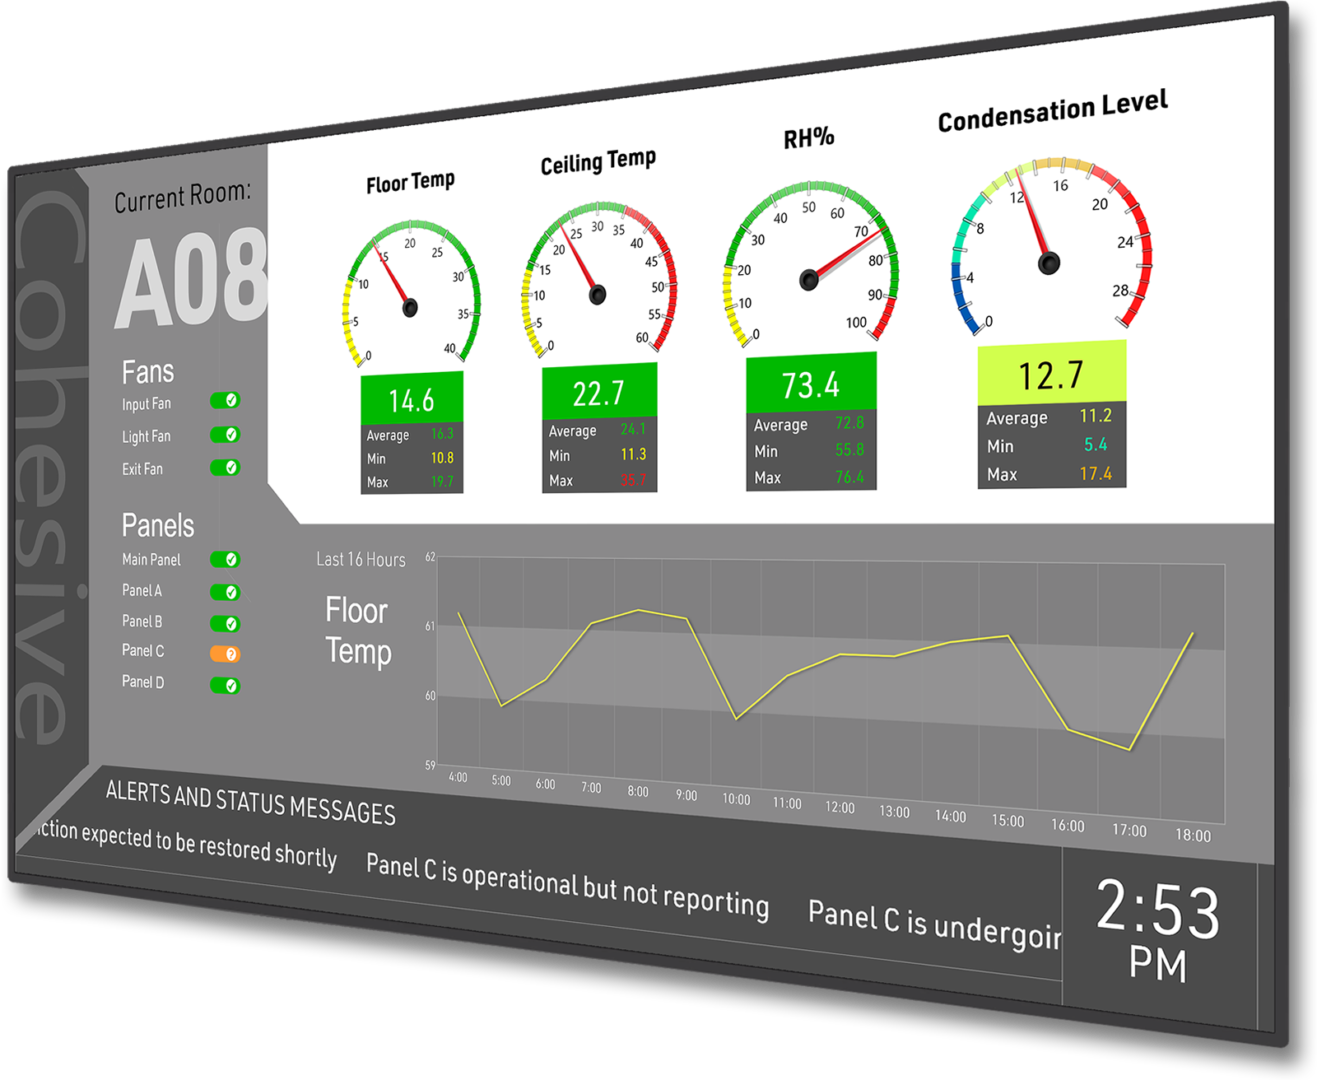 Digital signage in Manufacturing - Room environment monitoring display with real-time actionable information, data & gauges